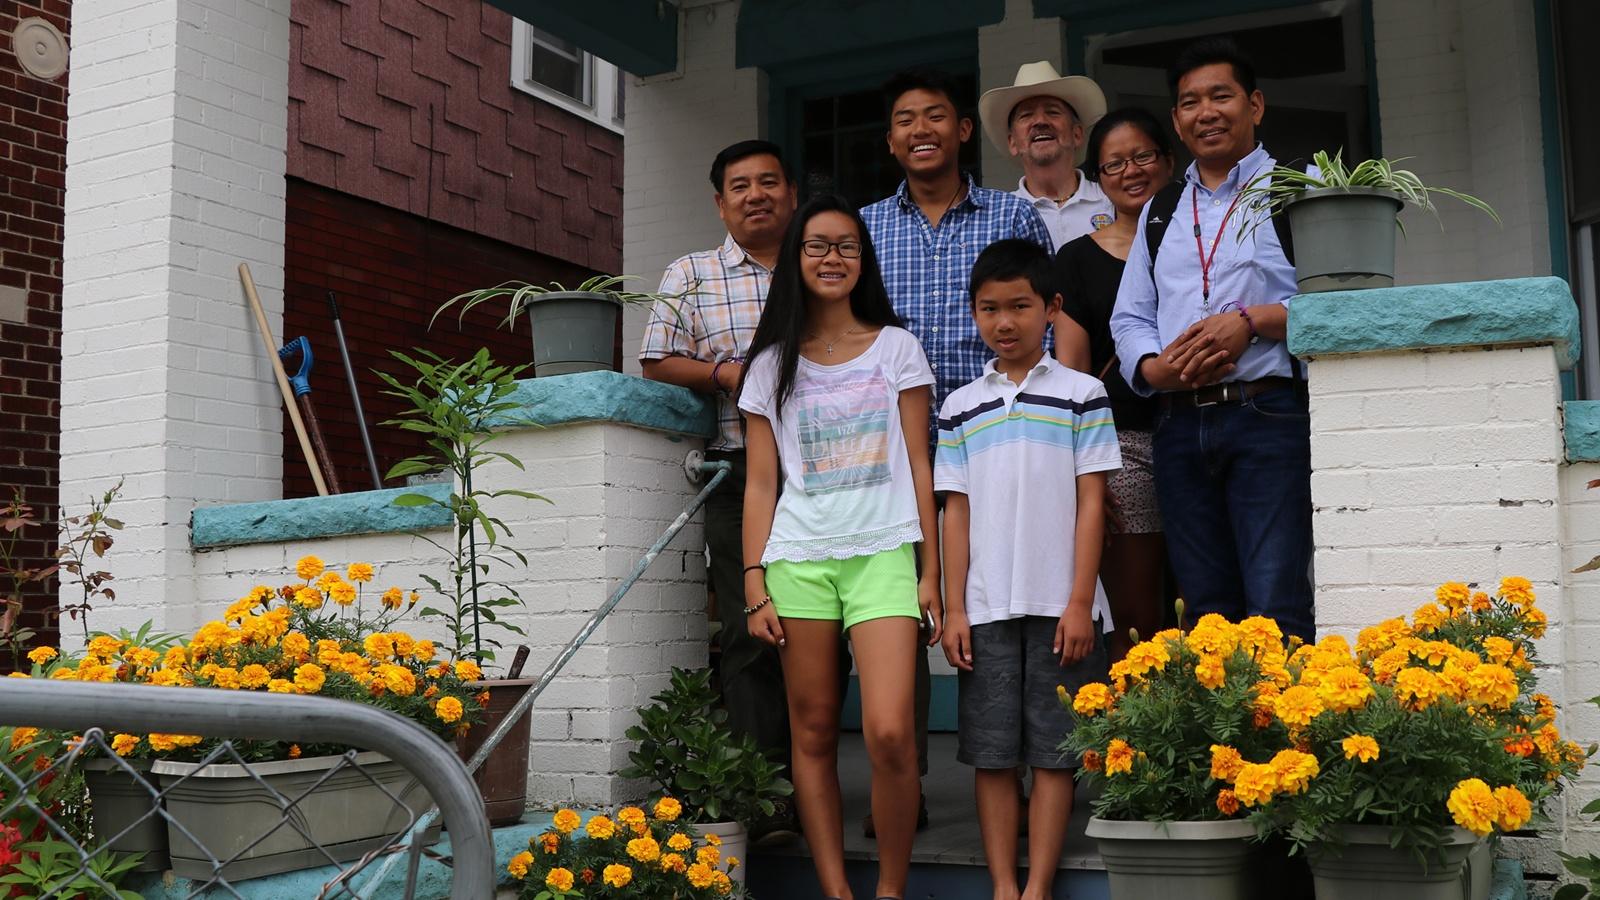 Brothers Minh and Tom Trân, their family, and Vietnam veteran Norm Murray. The Trân family escaped communist Vietnam in the late 1970’s after the Vietnam war.